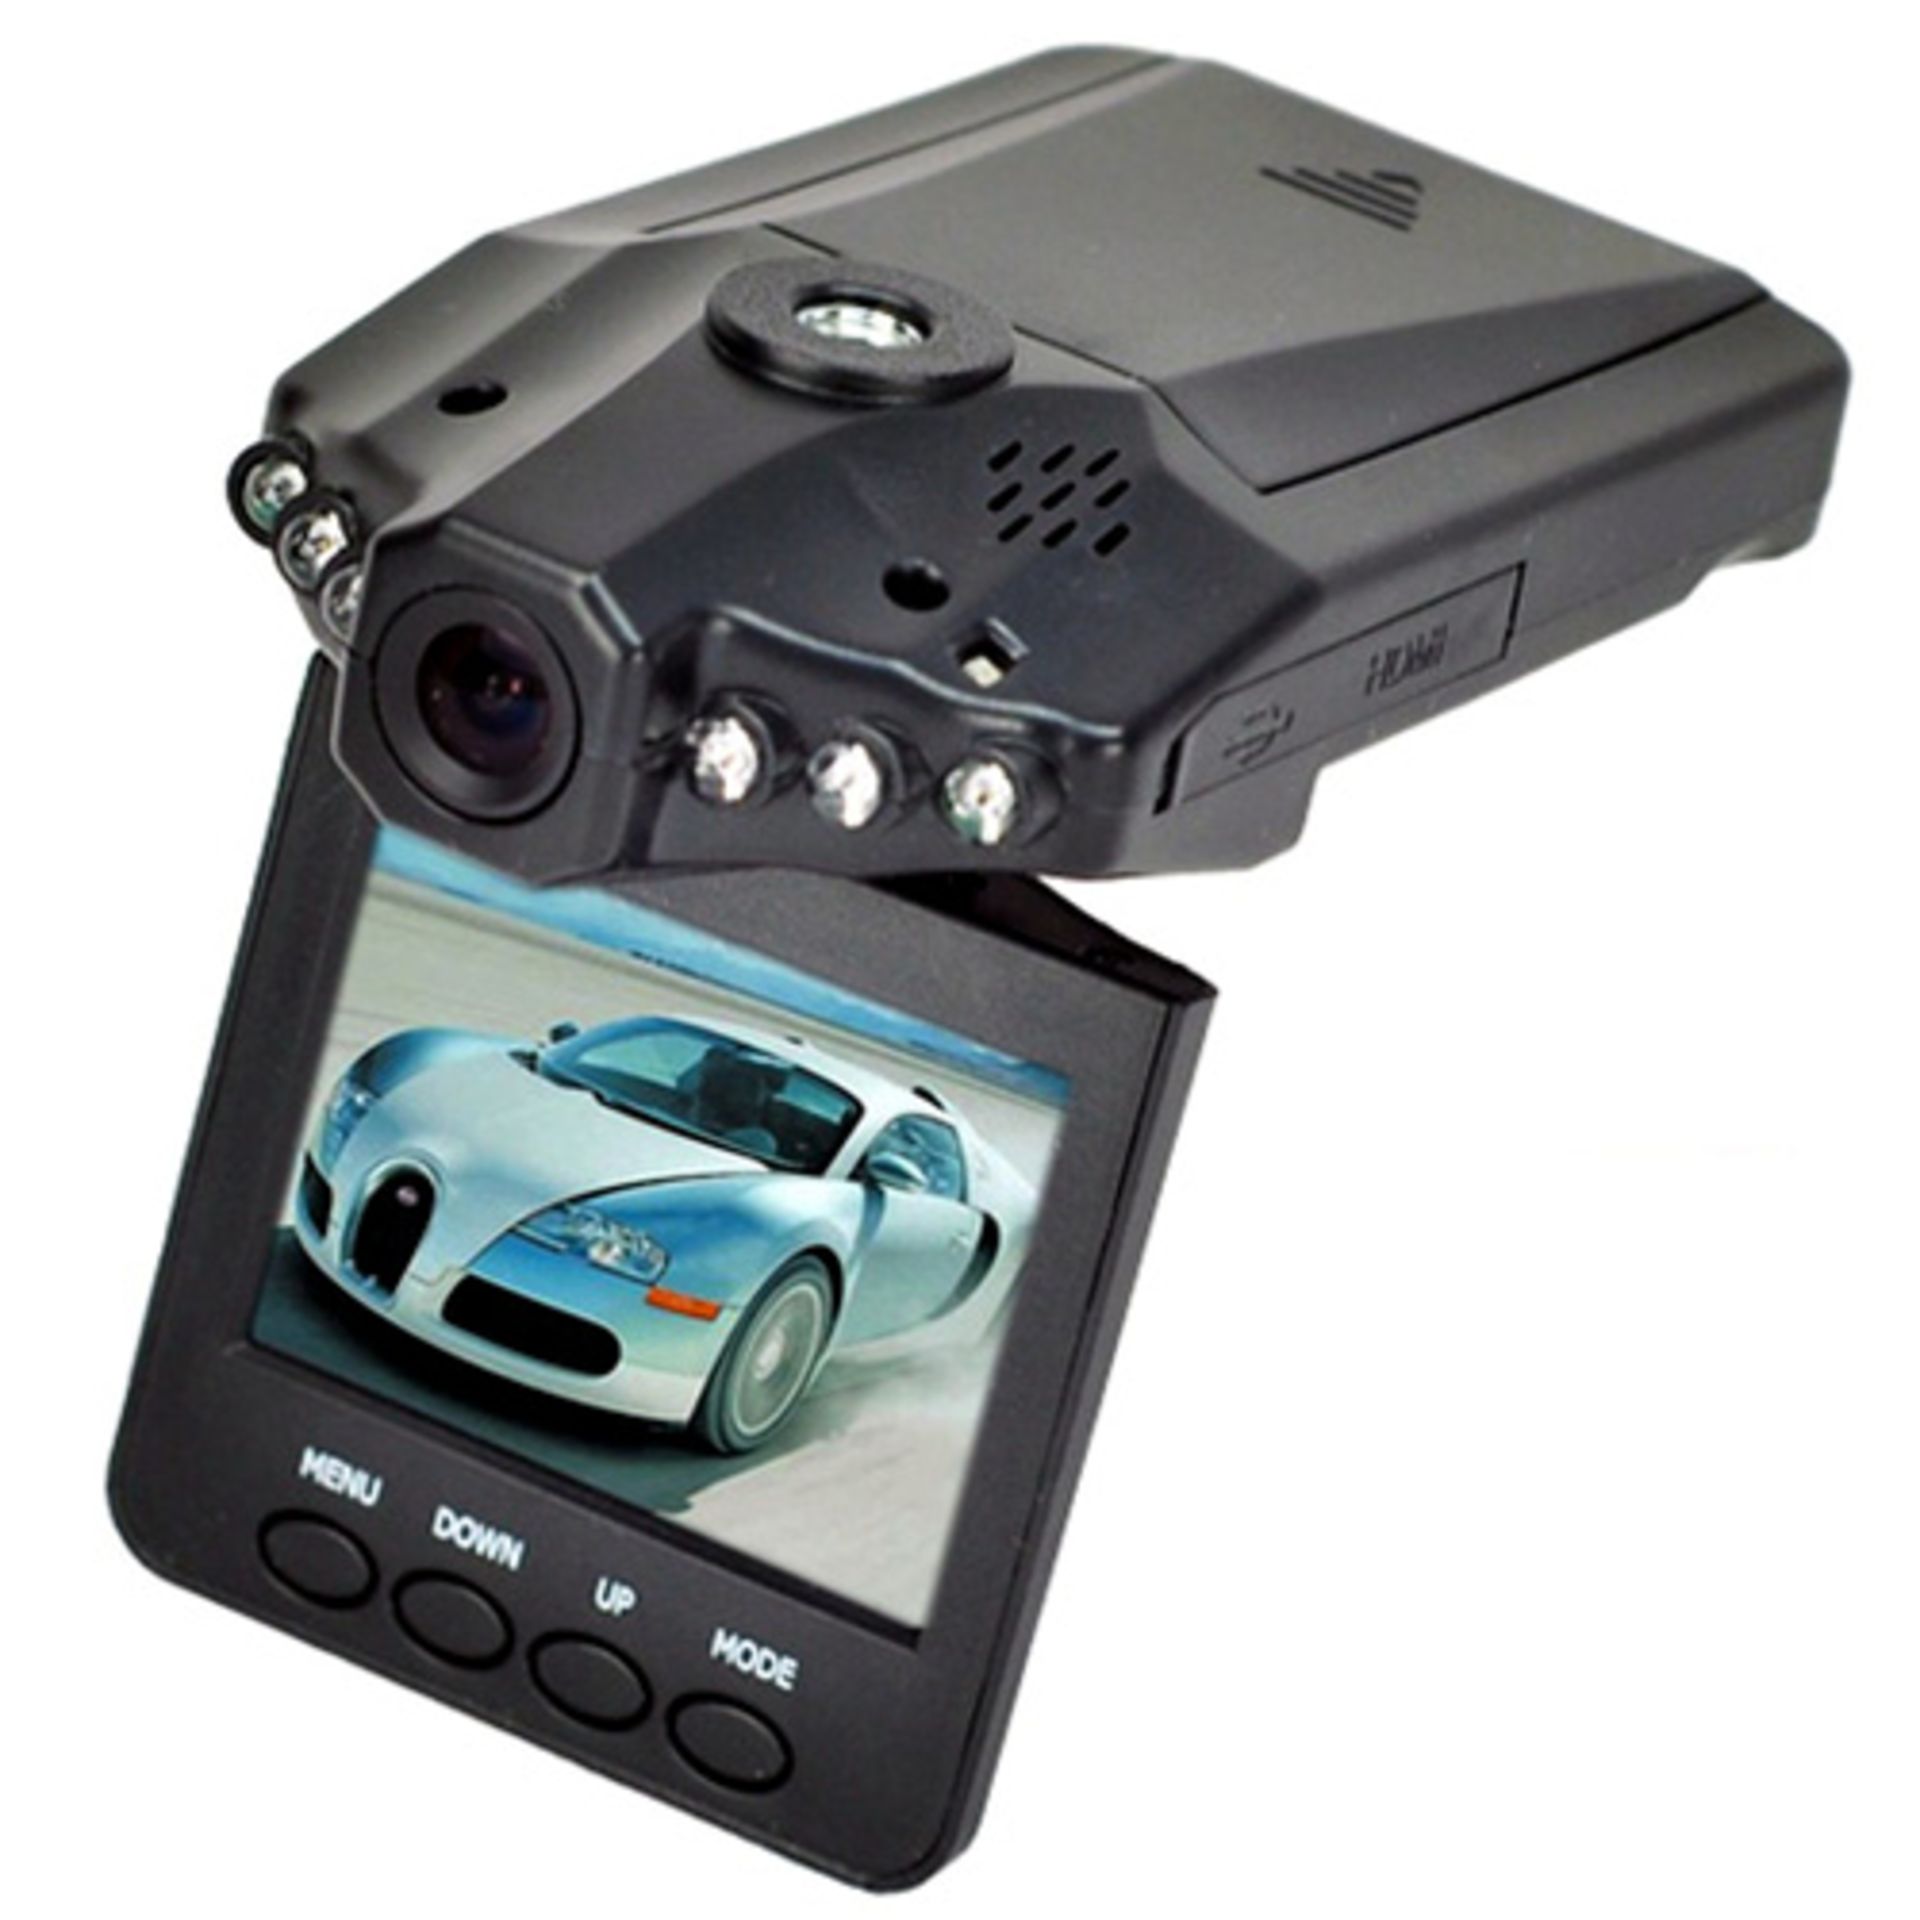 V Brand New HD Portable DVR Dashboard Camera With 2.5" TFT LCD Screen X 2 Bid price to be multiplied